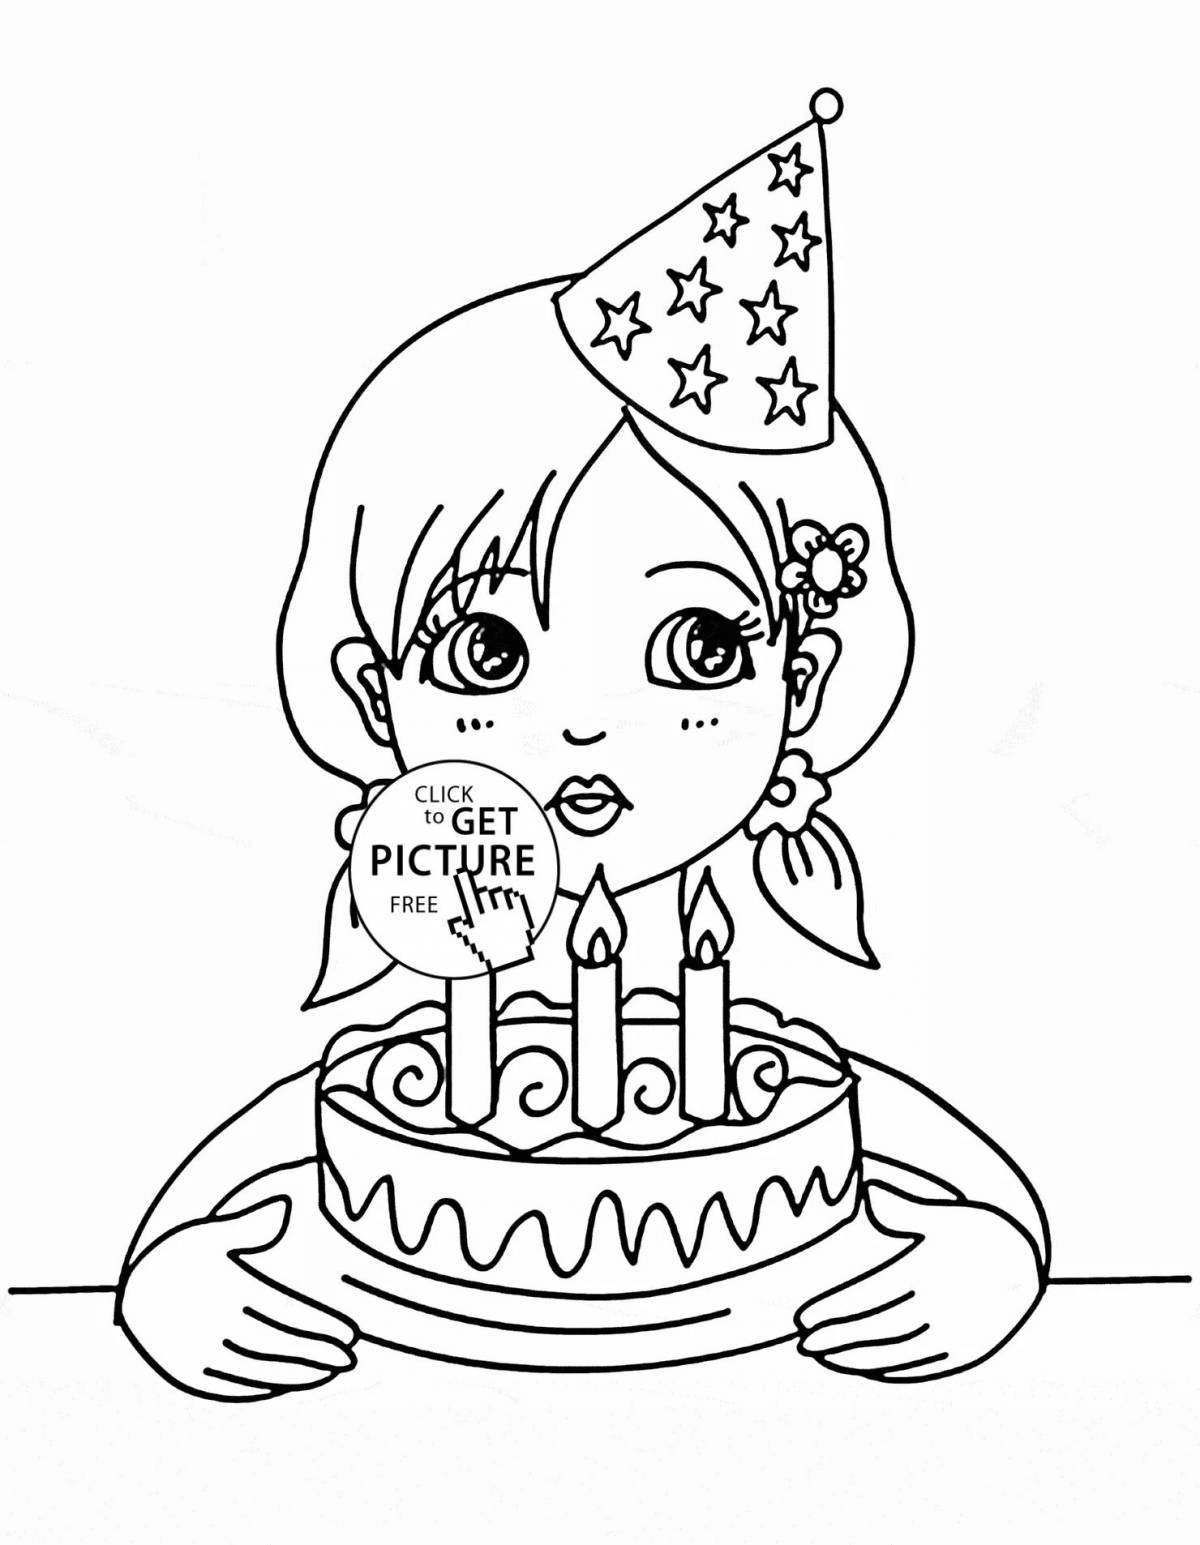 Charming 10th birthday coloring book